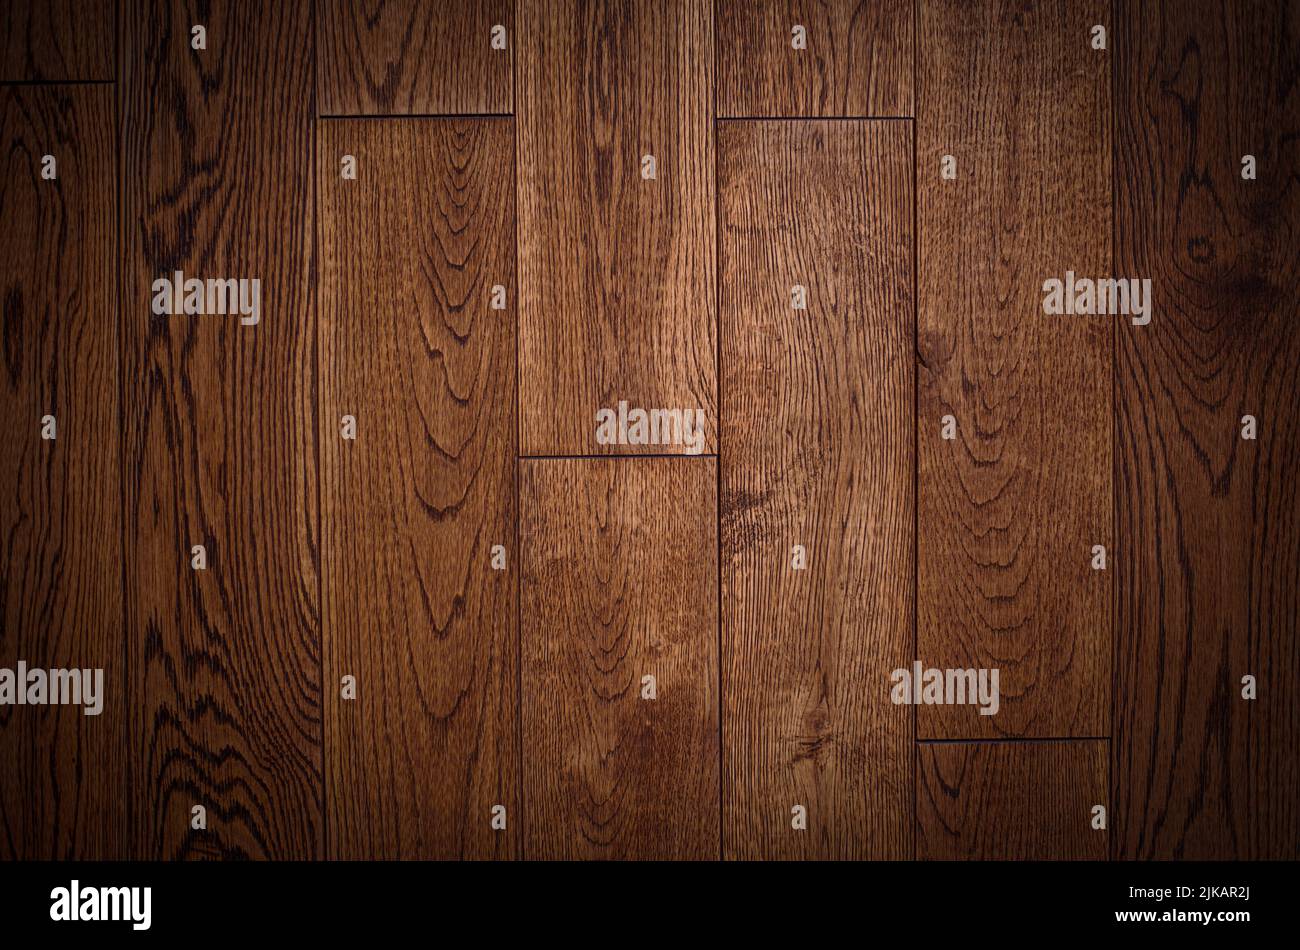 Background, pattern, wood. Background texture of tongue and groove wooden cladding running vertically Stock Photo